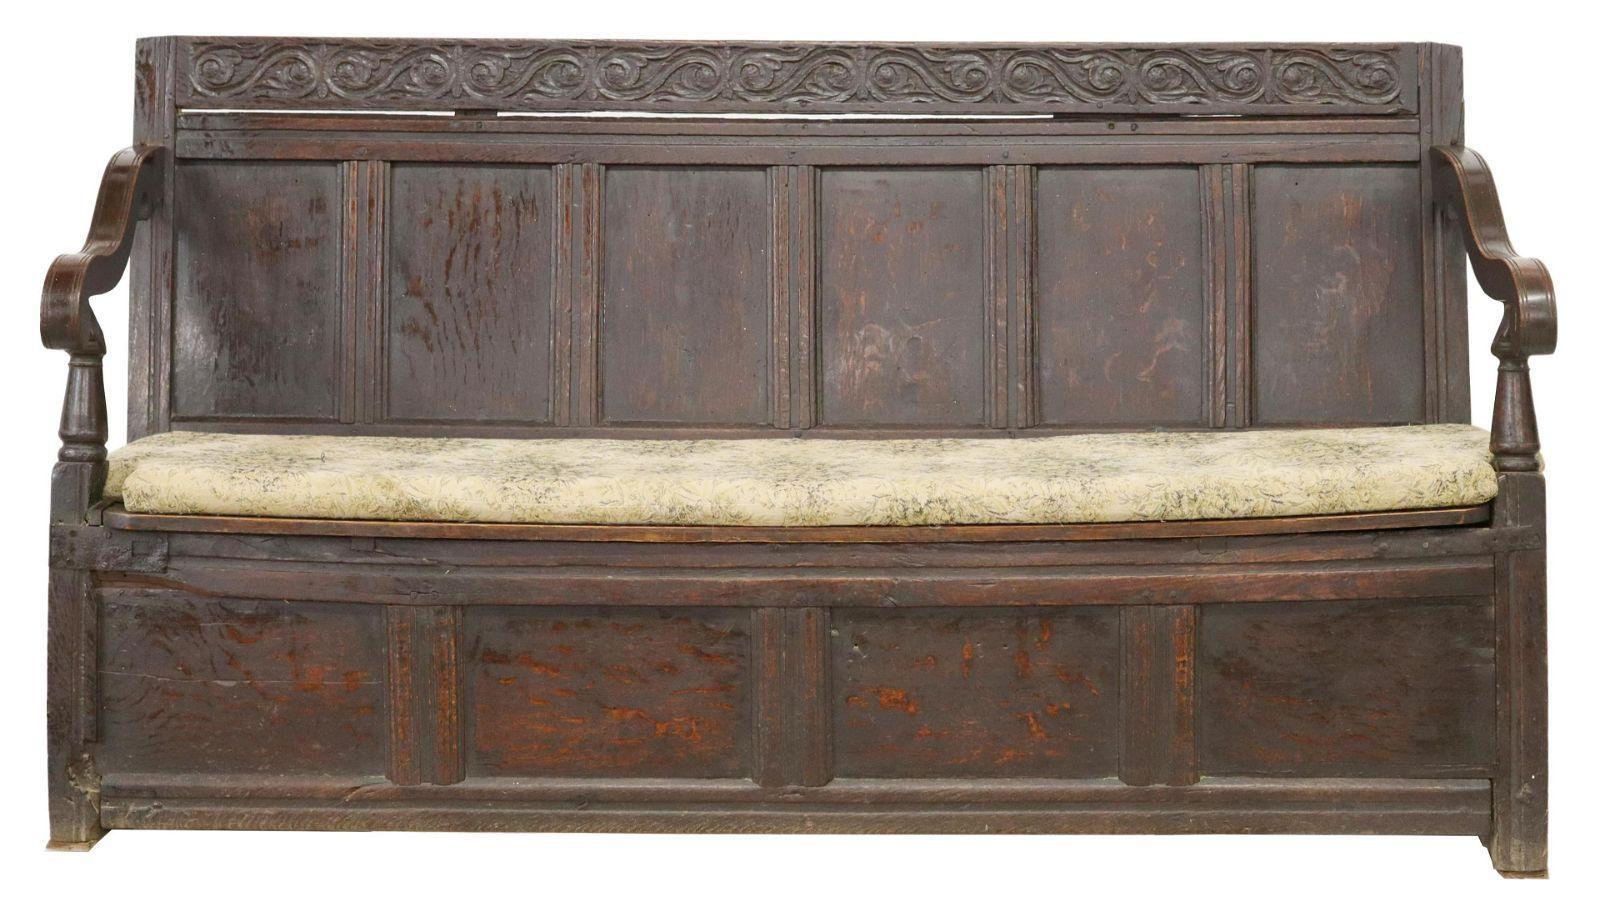 English oak settle hall bench, 18th c. This bench features scrolling foliate carved crest, over paneled back, curved arms on turned supports, removable seat cushion above hinged seat, opening to interior storage, rising on conforming base, some wood